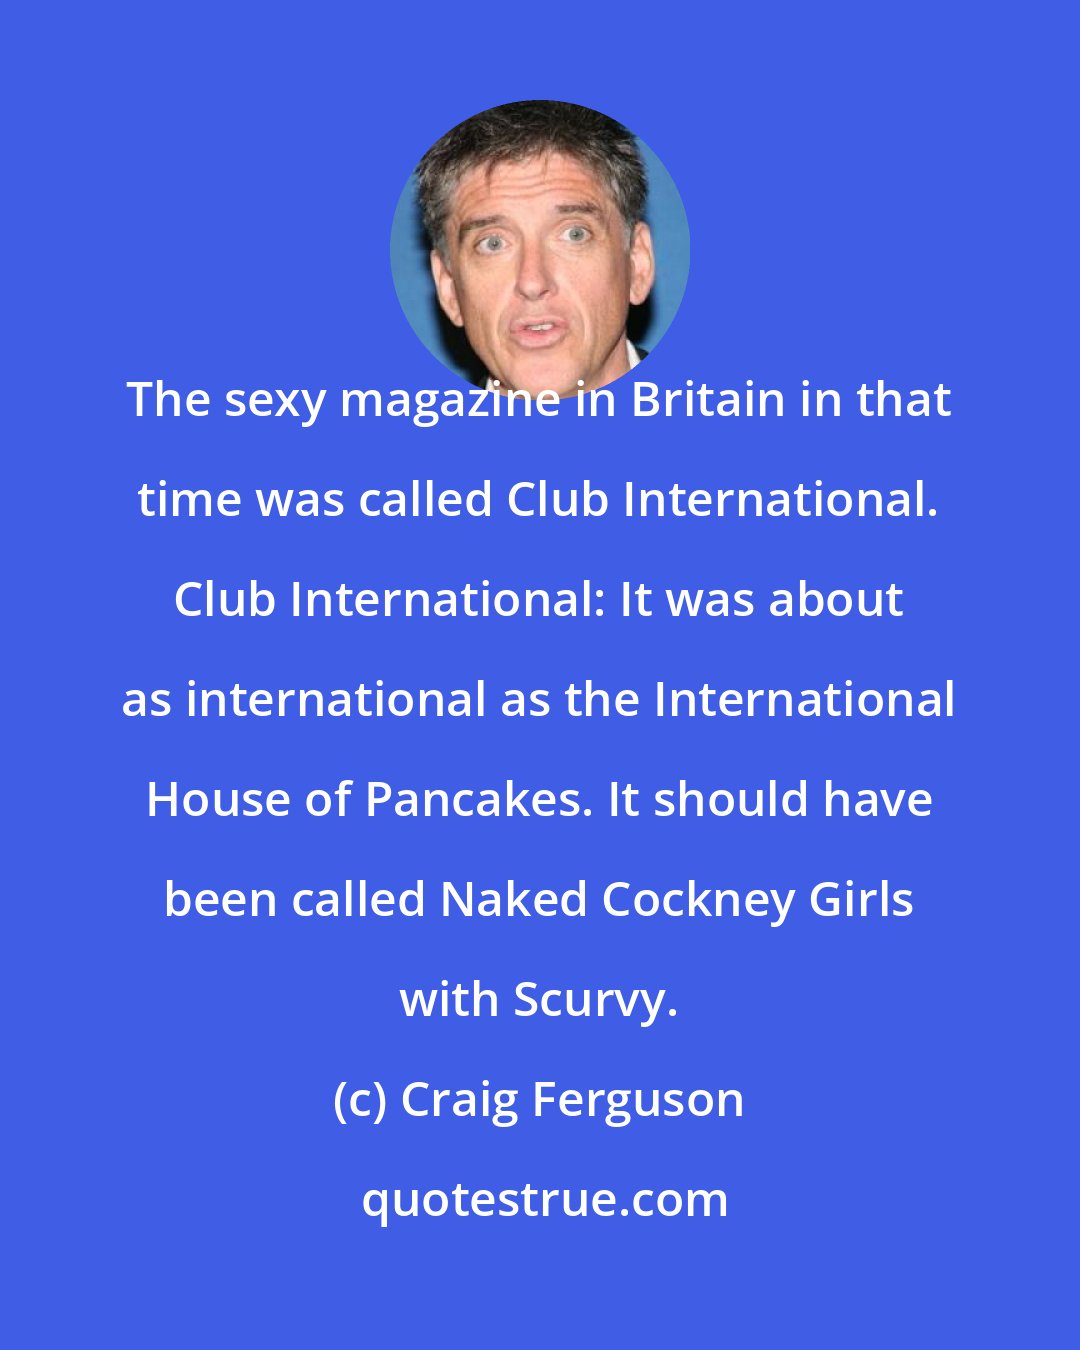 Craig Ferguson: The sexy magazine in Britain in that time was called Club International. Club International: It was about as international as the International House of Pancakes. It should have been called Naked Cockney Girls with Scurvy.